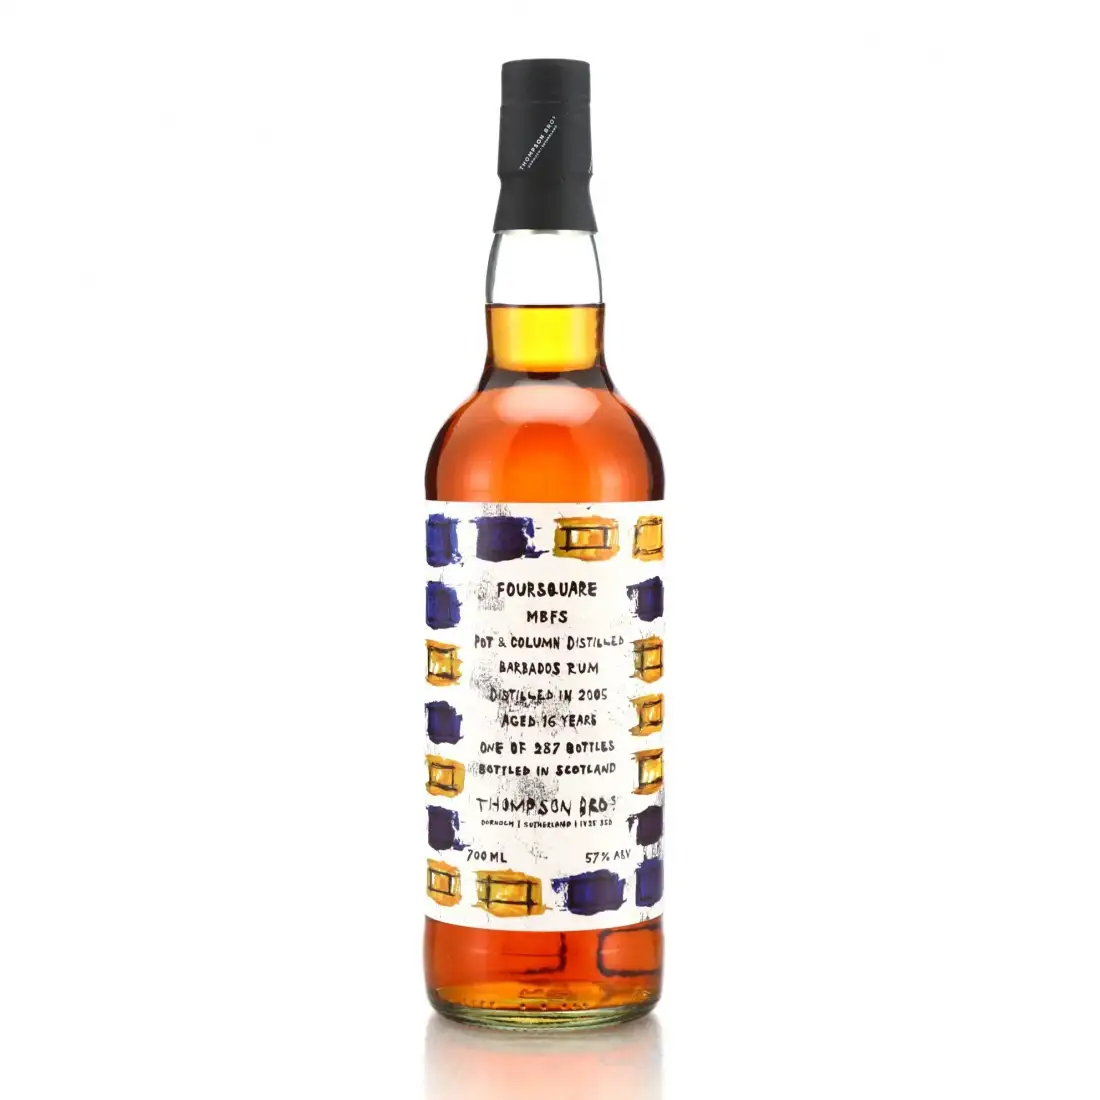 Image of the front of the bottle of the rum MBFS